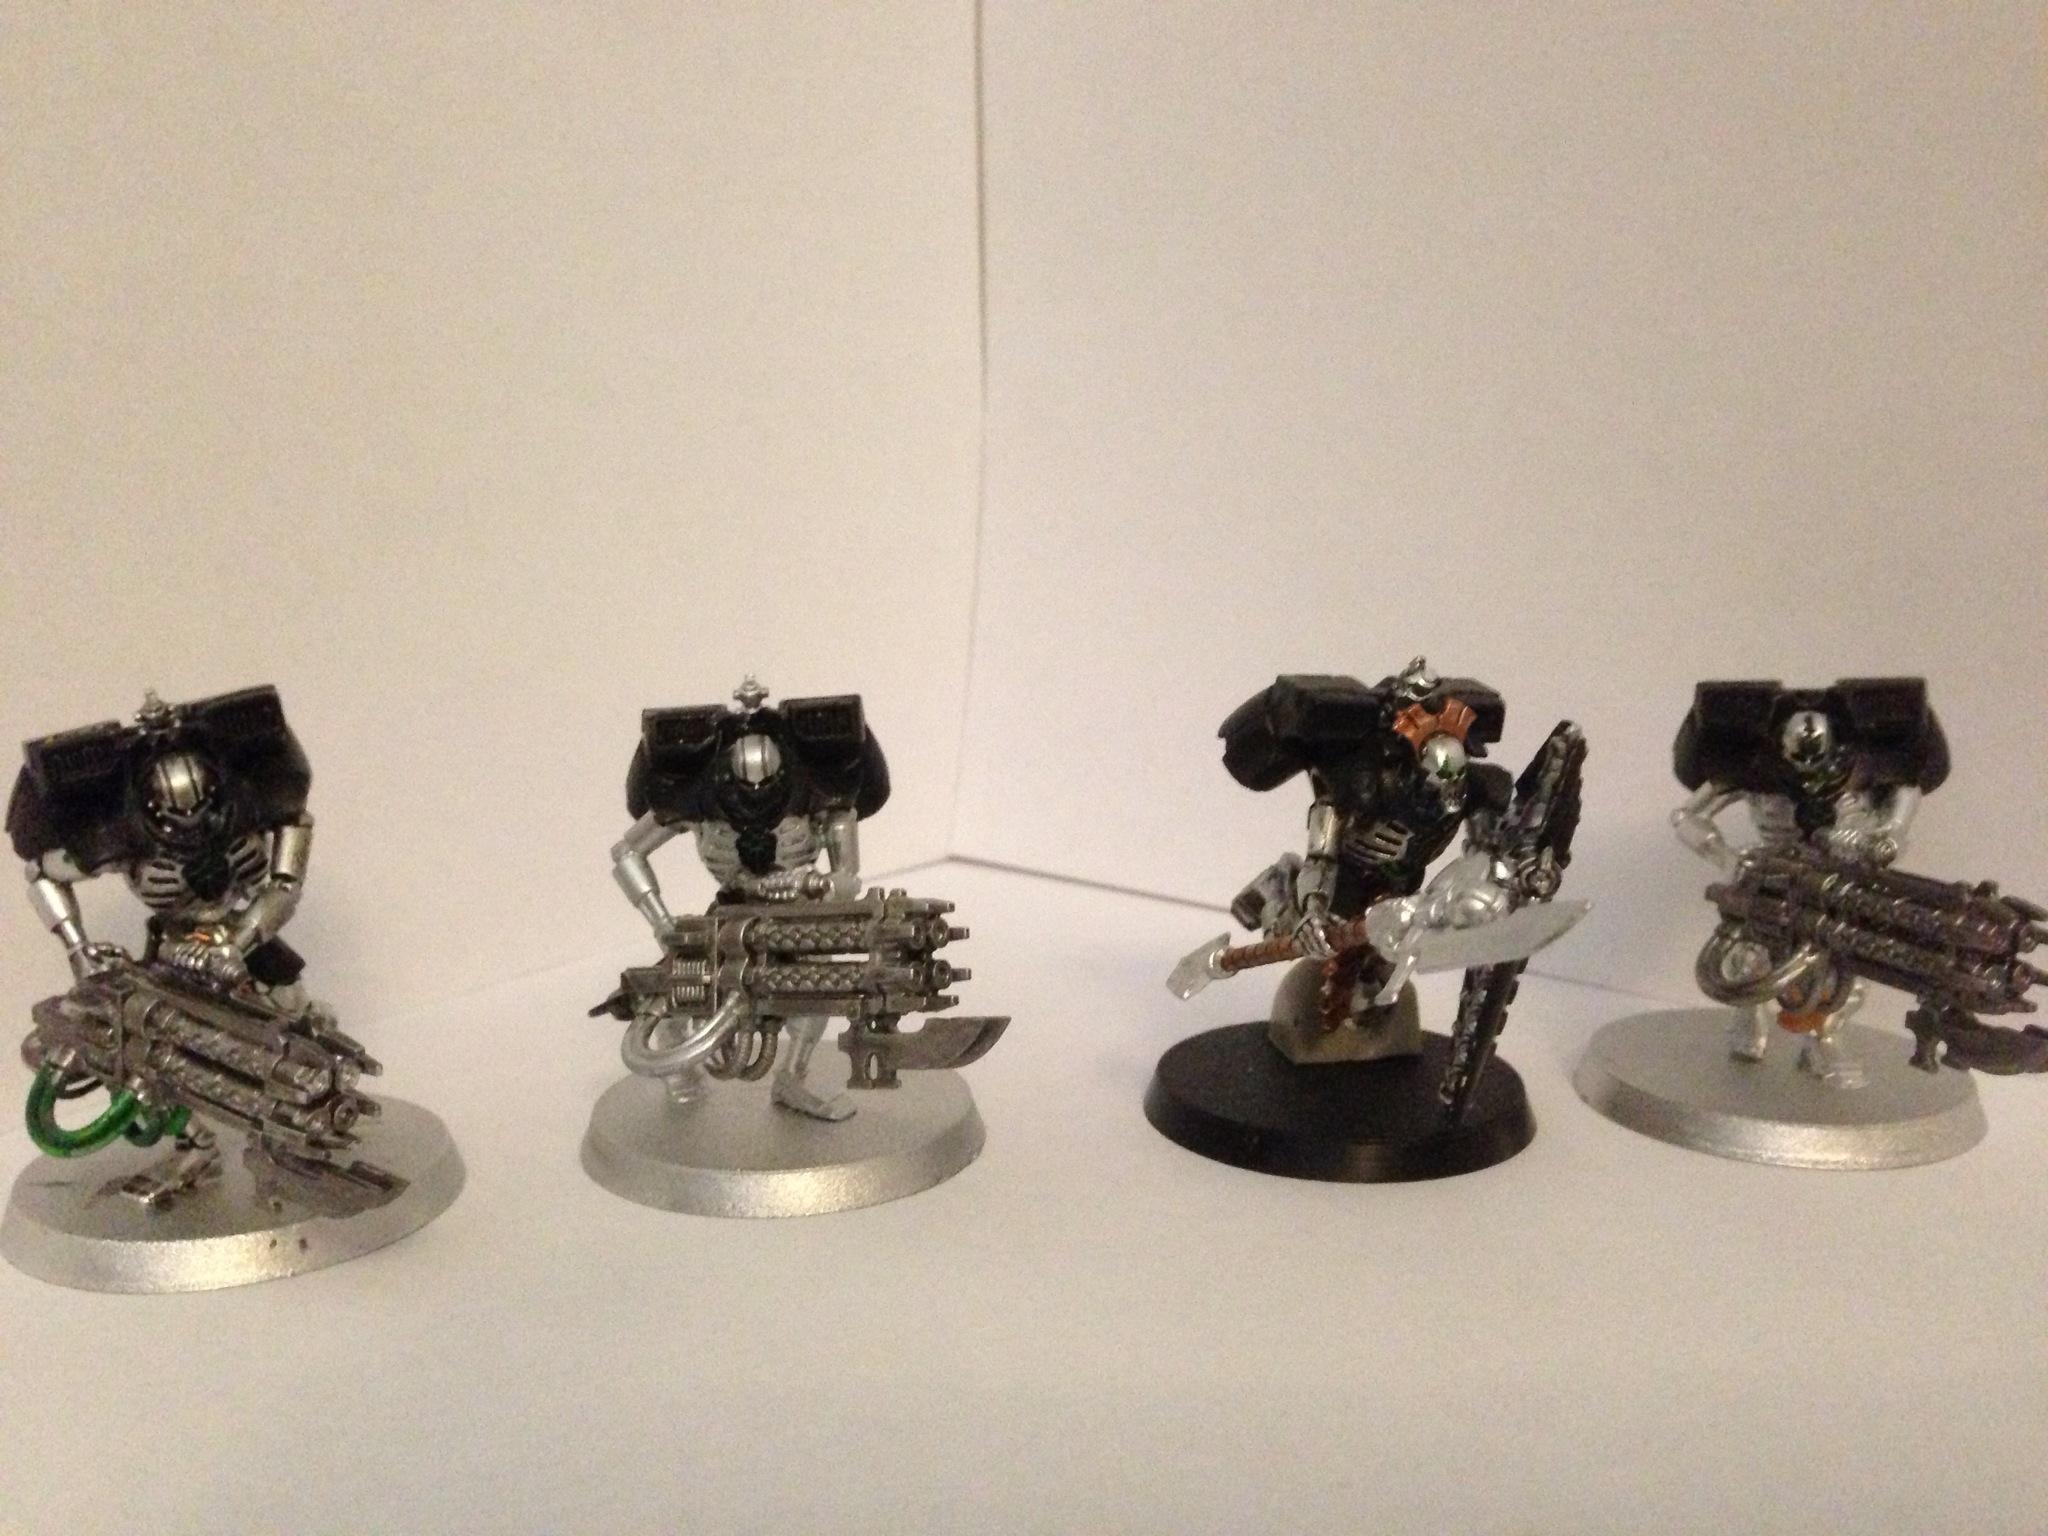 My destroyer lord and my 3 heavies that are almost finished